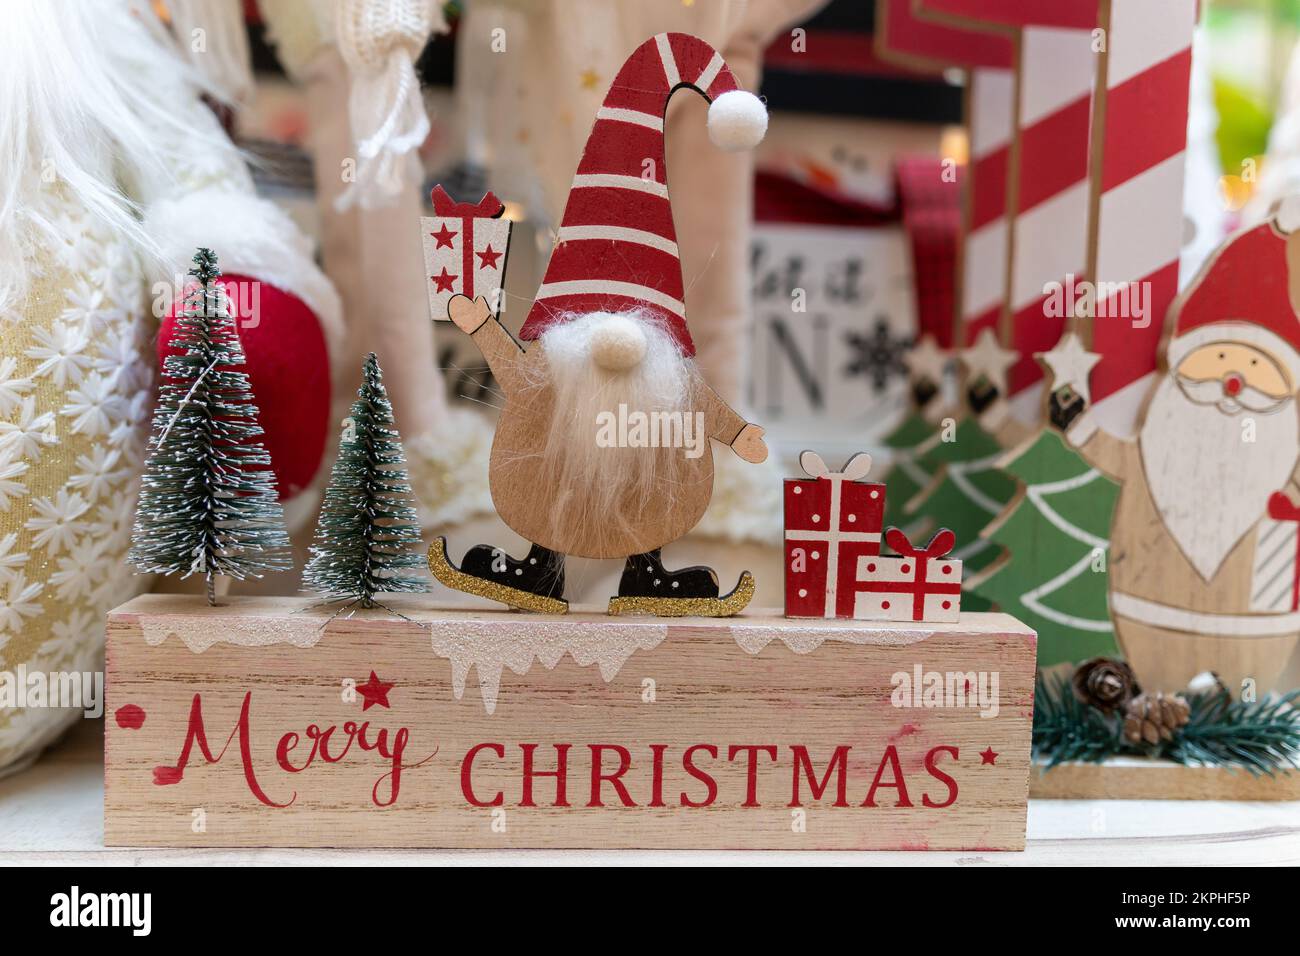 Close-up view of a wooden Christmas Santa Claus decoration. Stock Photo